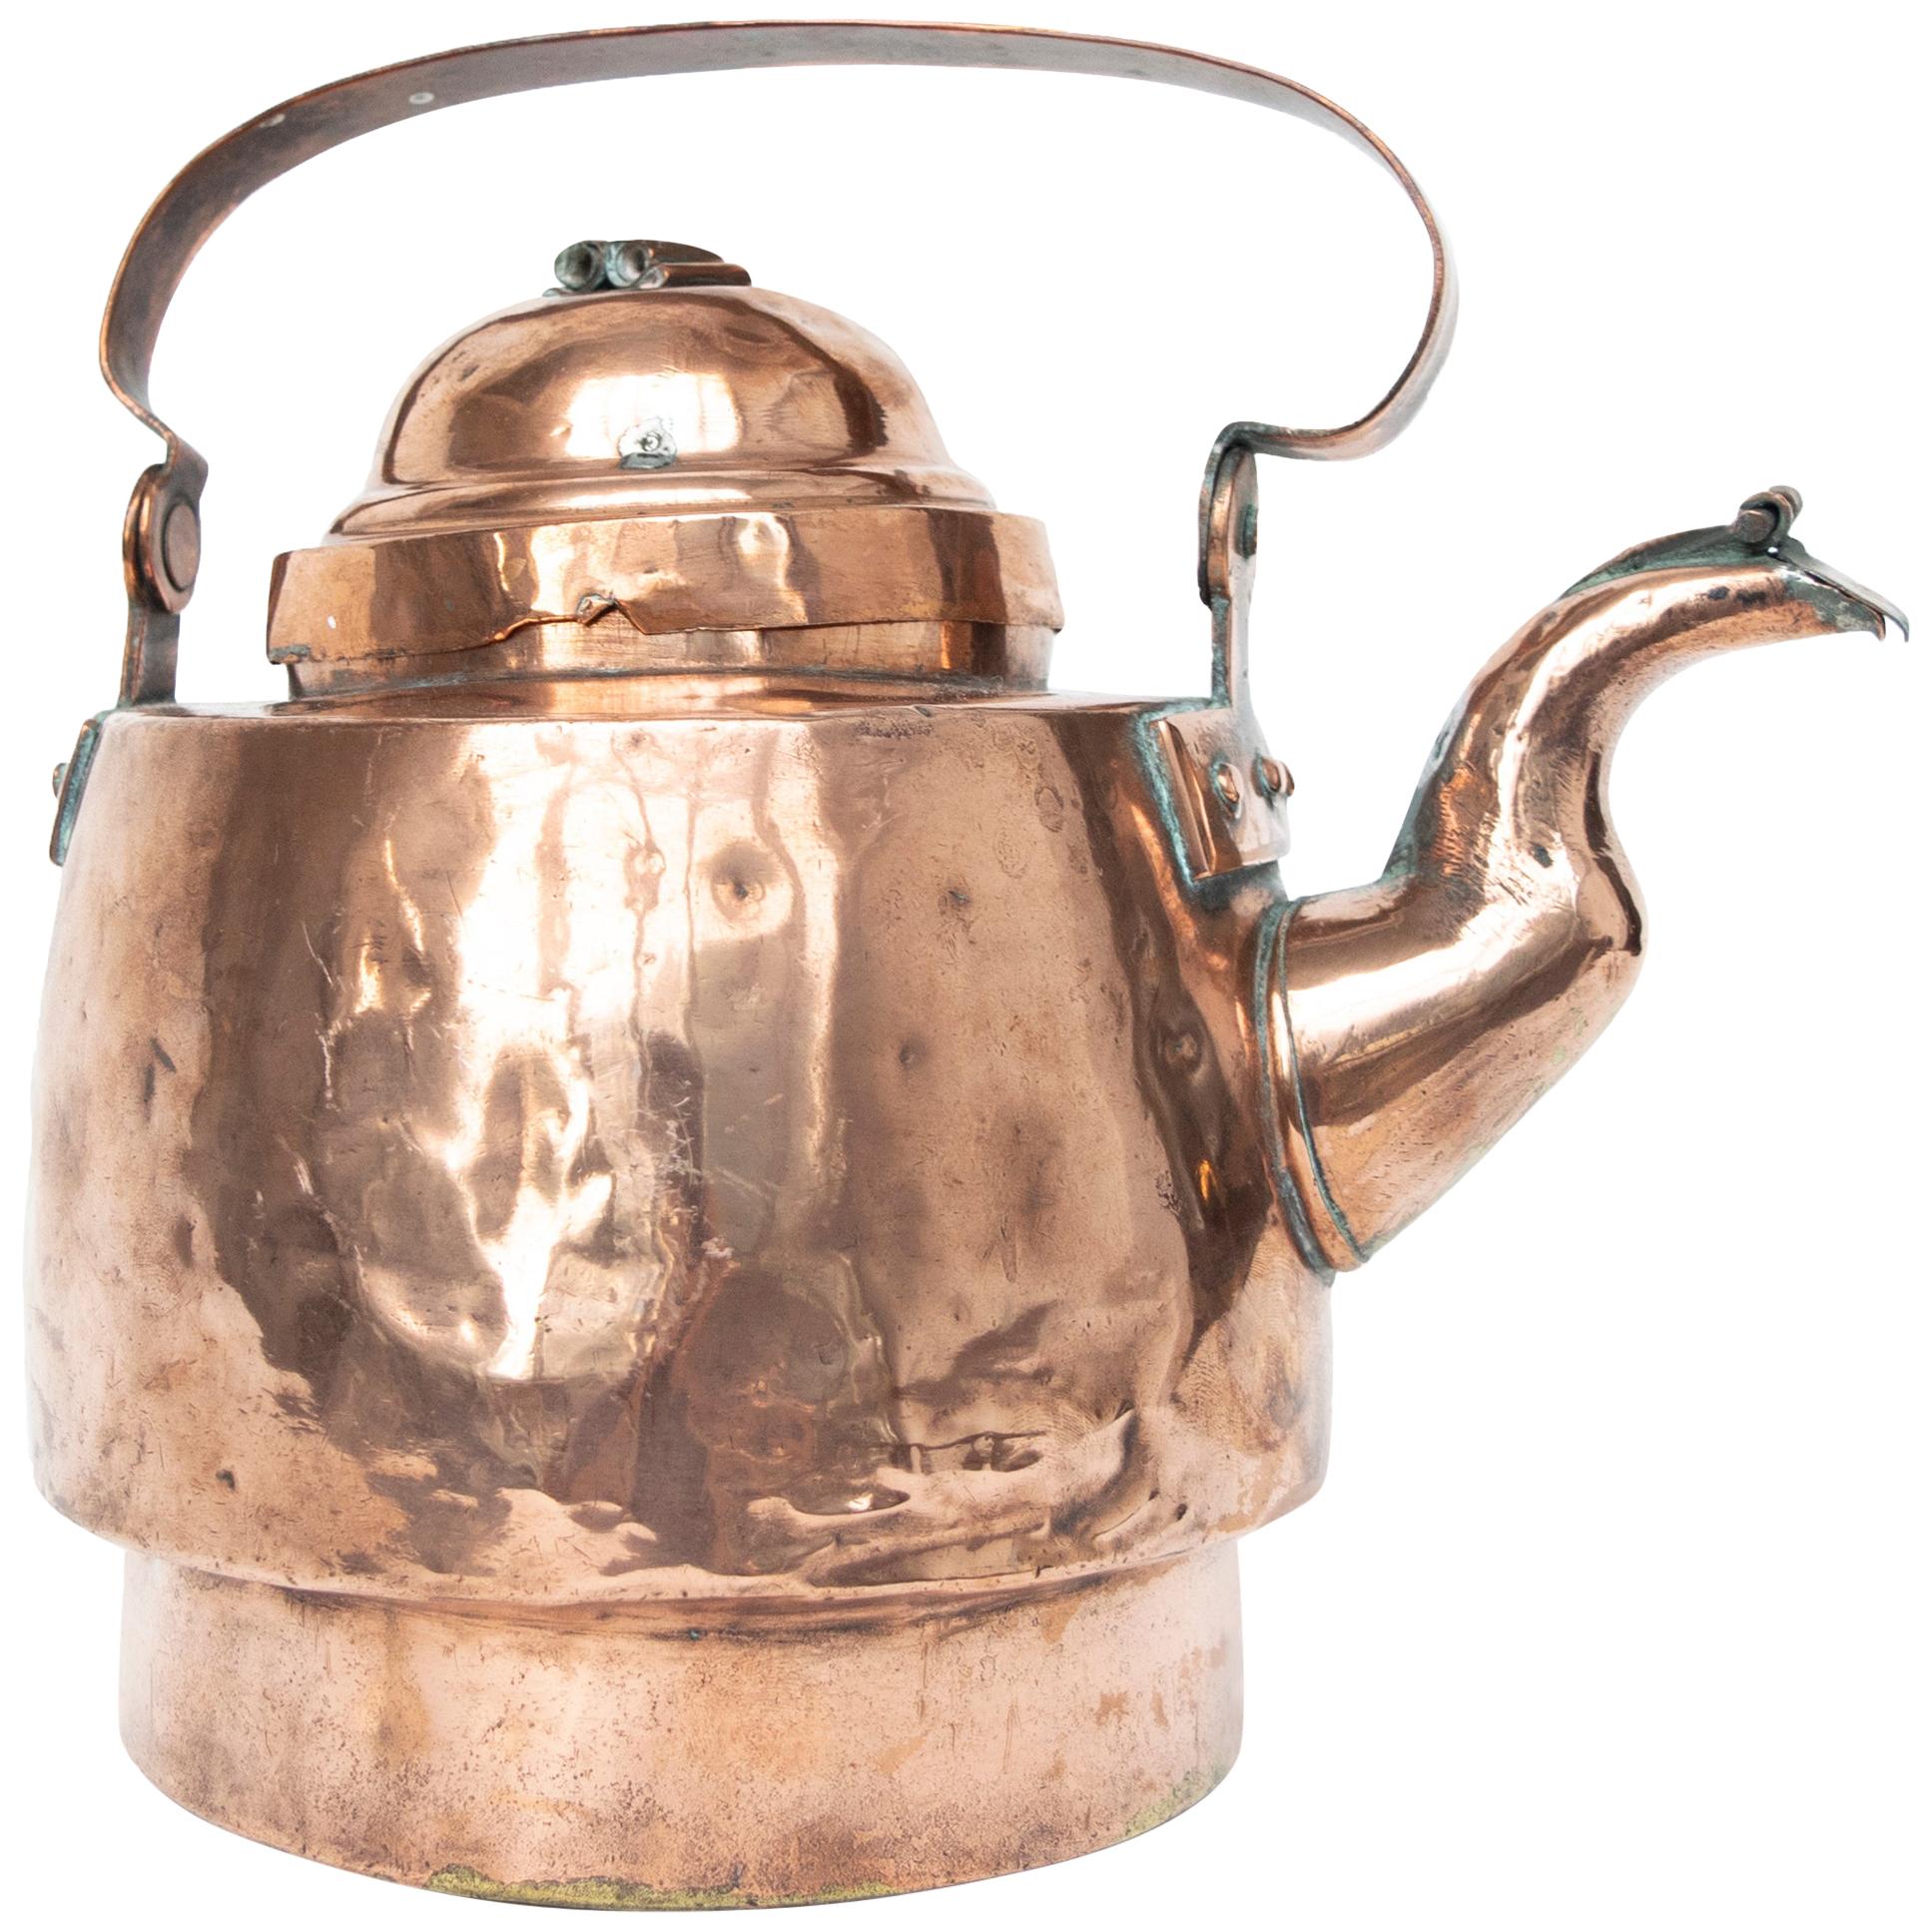 Antique Copper Kettle from Sweden Early 1900s "Kisa" For Sale